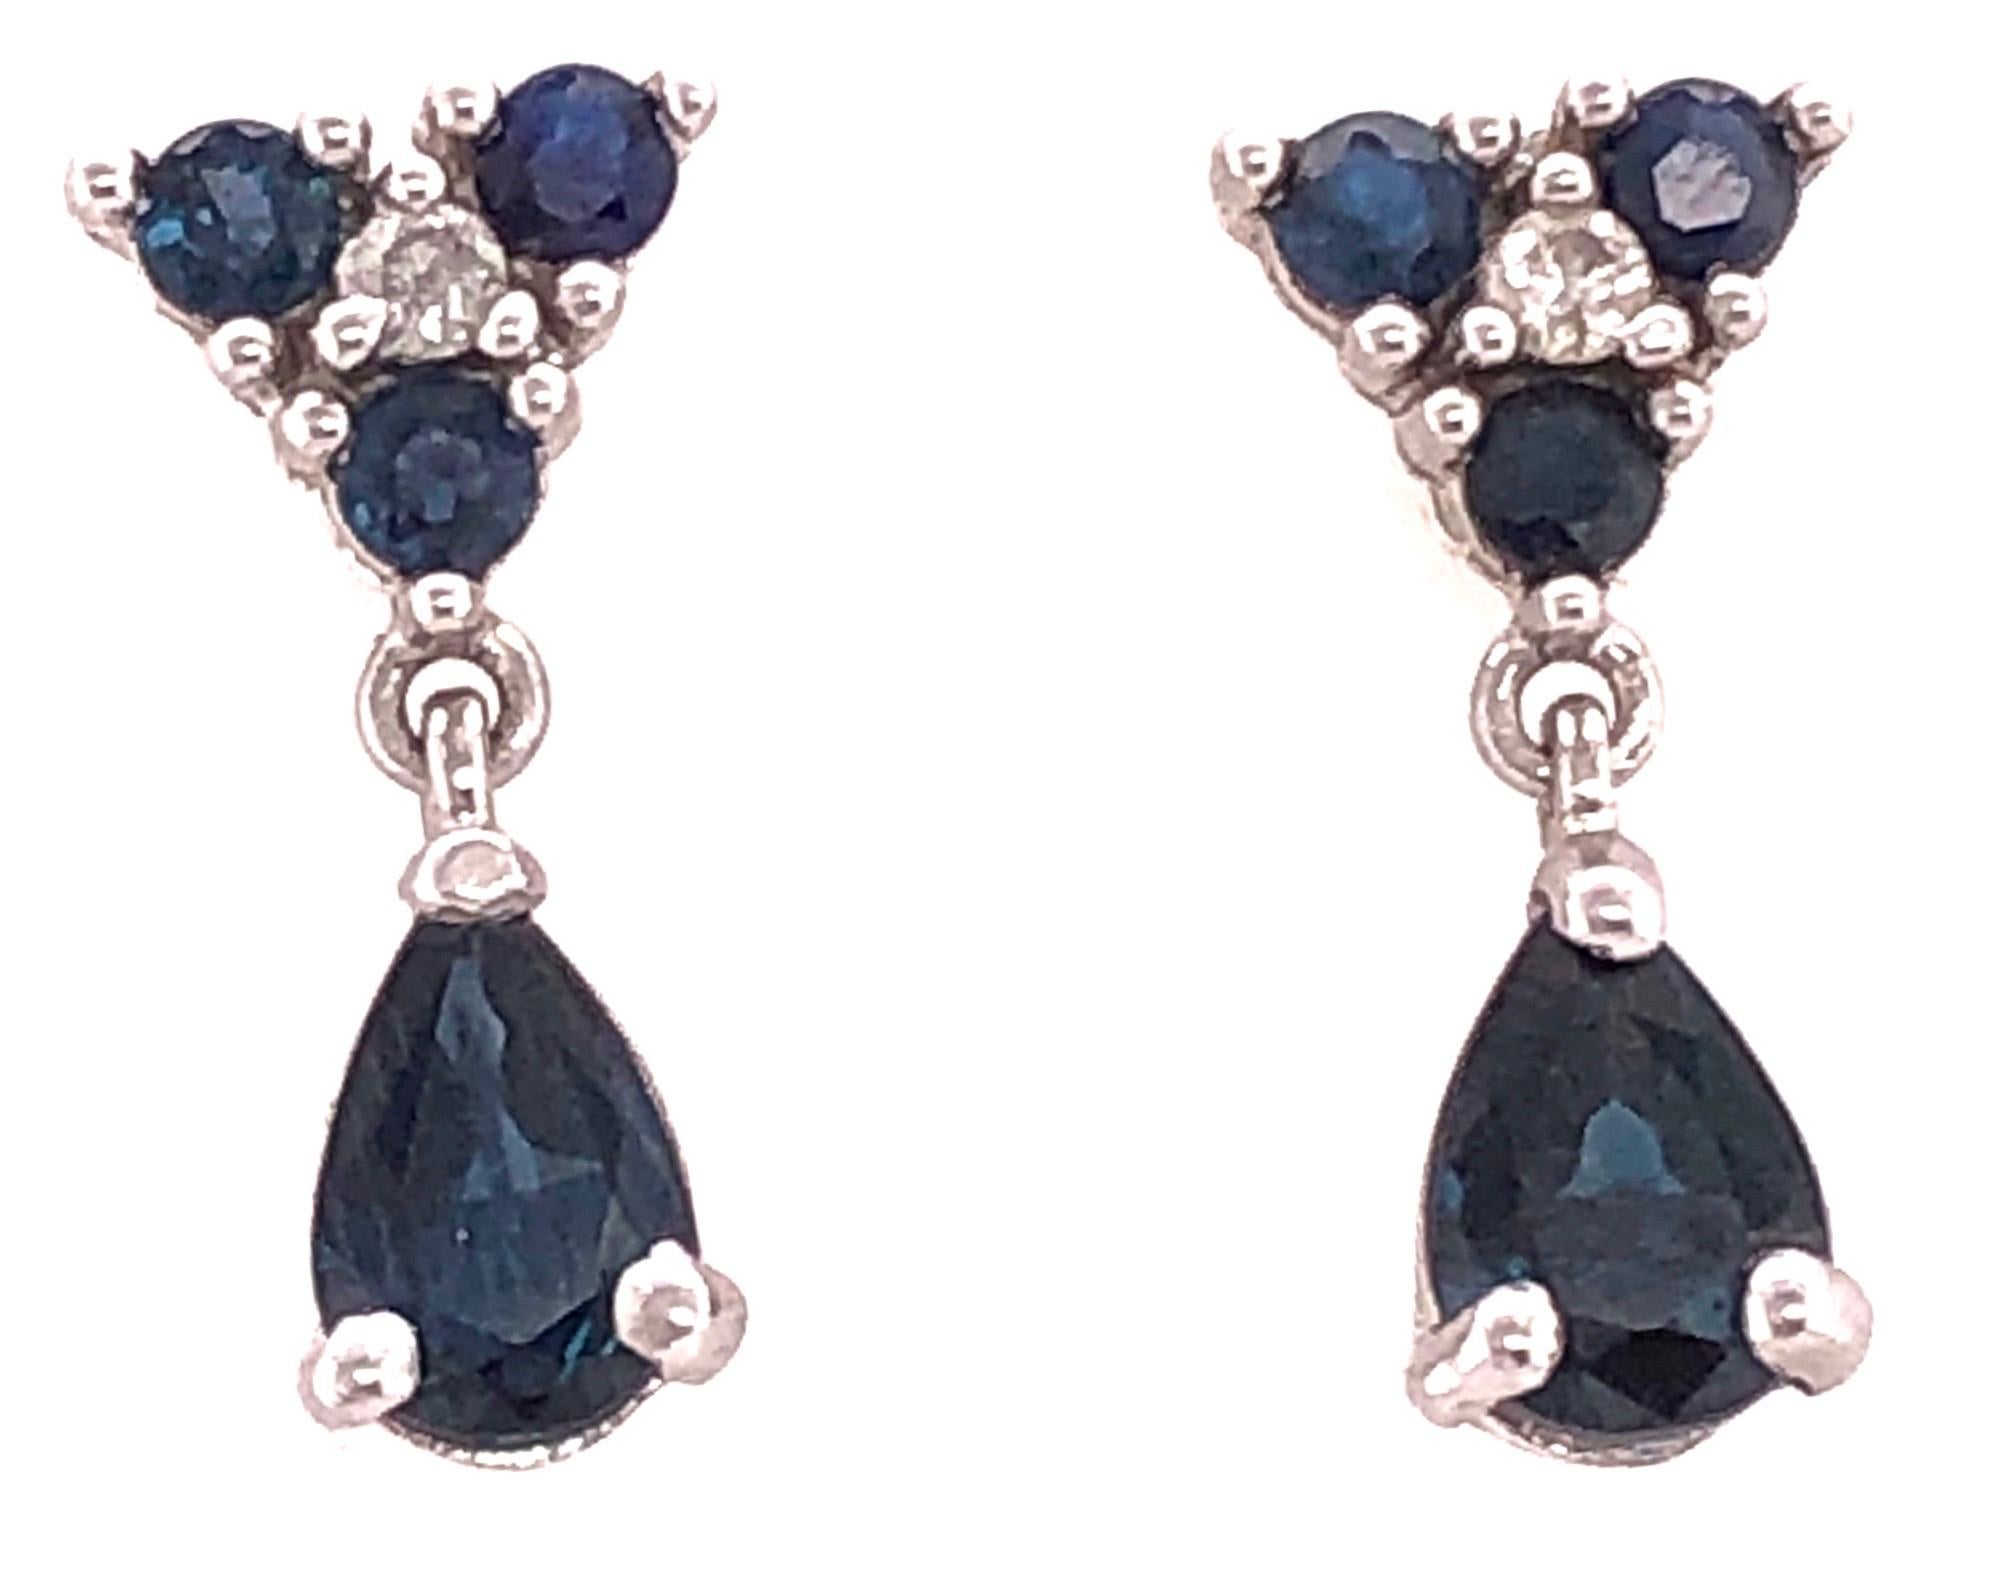 14Kt White Gold Blue Sapphire Earrings 0.02 Total Diamond Weight.
1.47 grams total weight 19.50mm high.
16 mm long by 6.7 mm wide